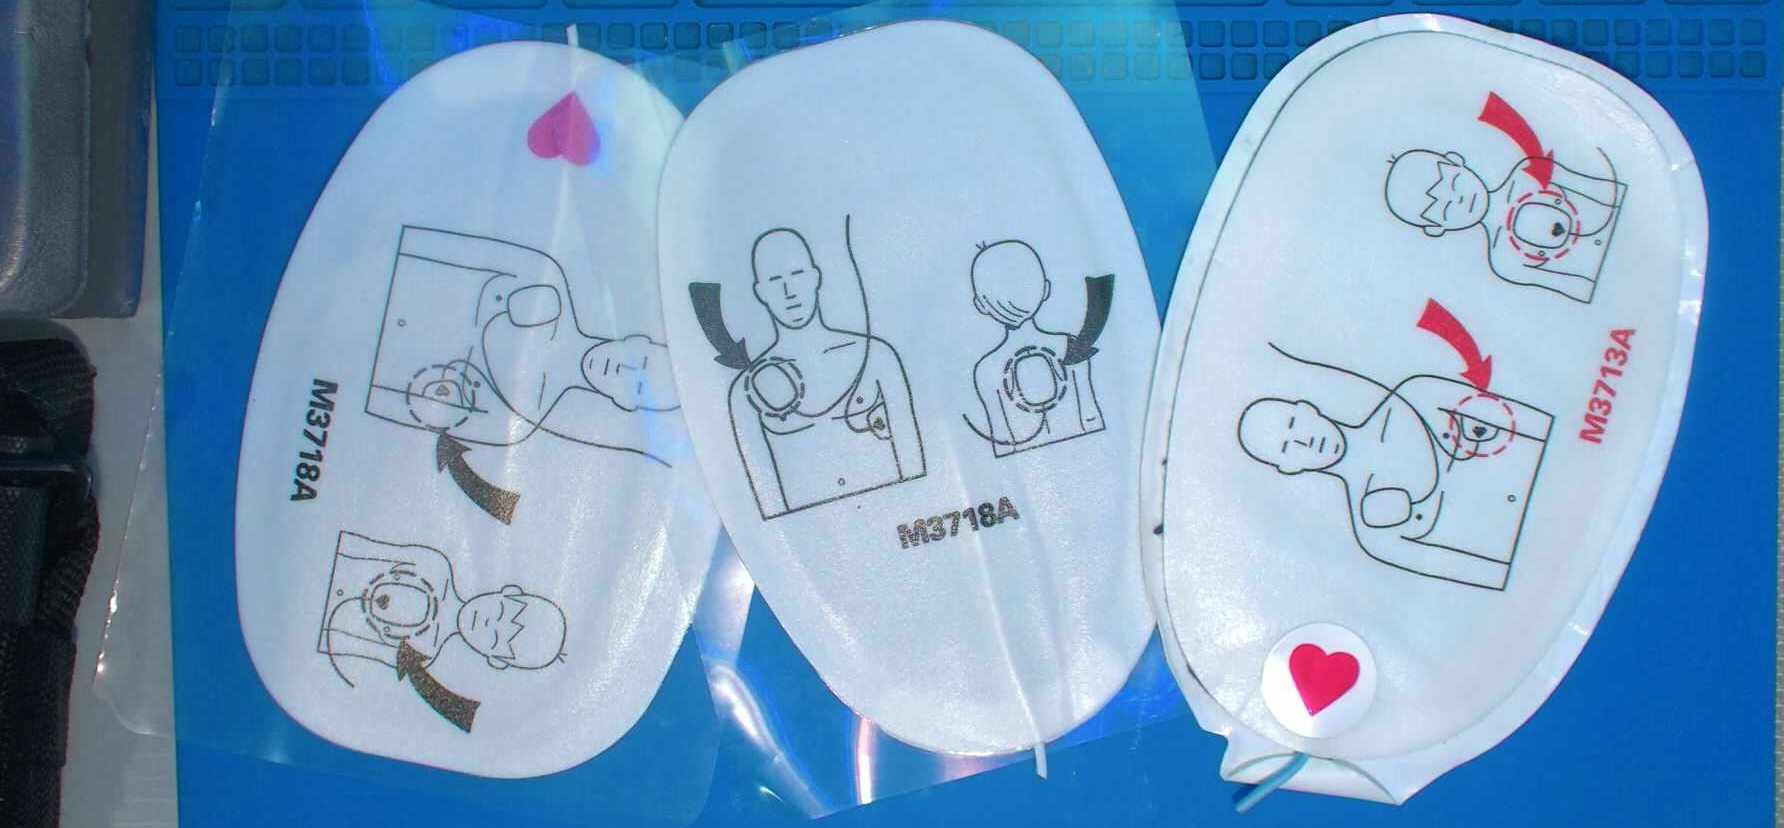 Defibrillator pads for off-label use as non-vented chest seals.